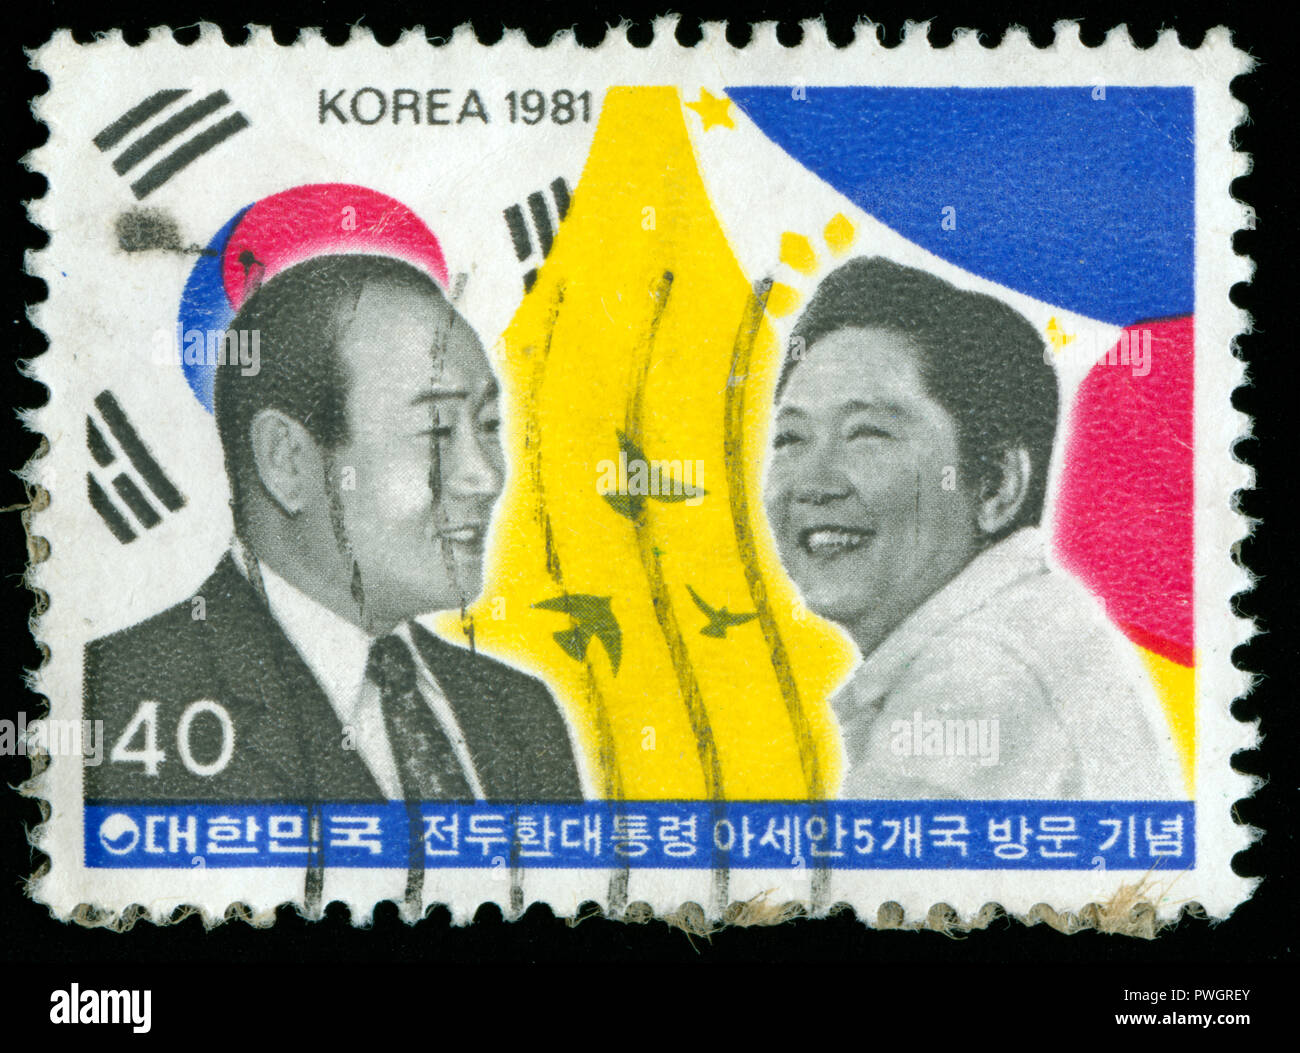 Postmarked stamp from South Korea in the President's visit to ASEAN countries series issued in 1981 Stock Photo